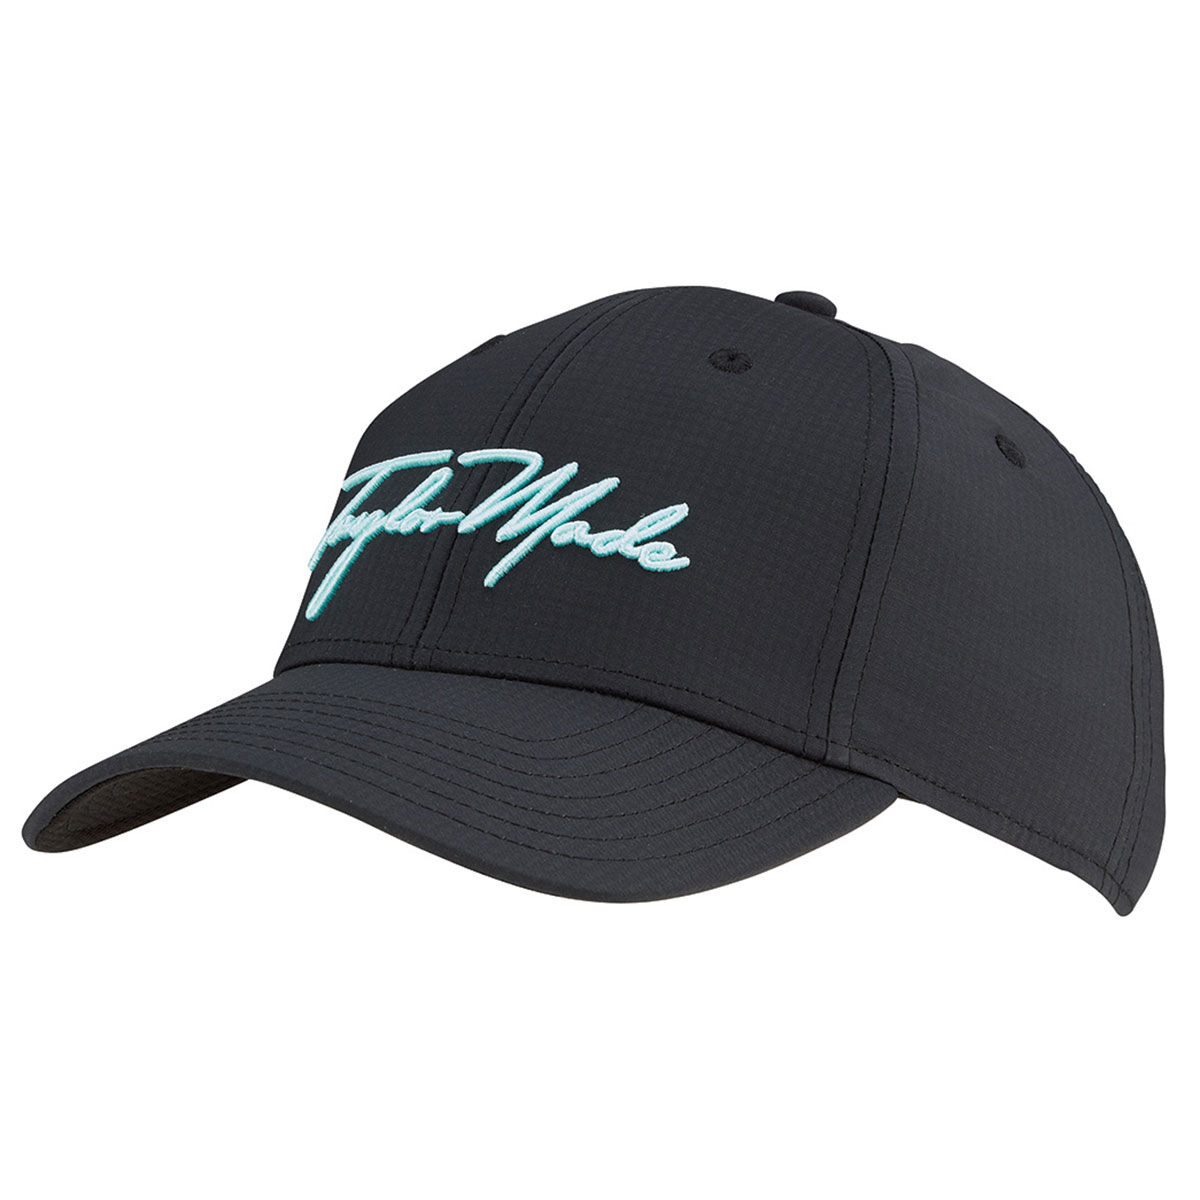 TaylorMade Women’s Black and Blue Comfortable Embroidered Script Golf Cap | American Golf, One Size